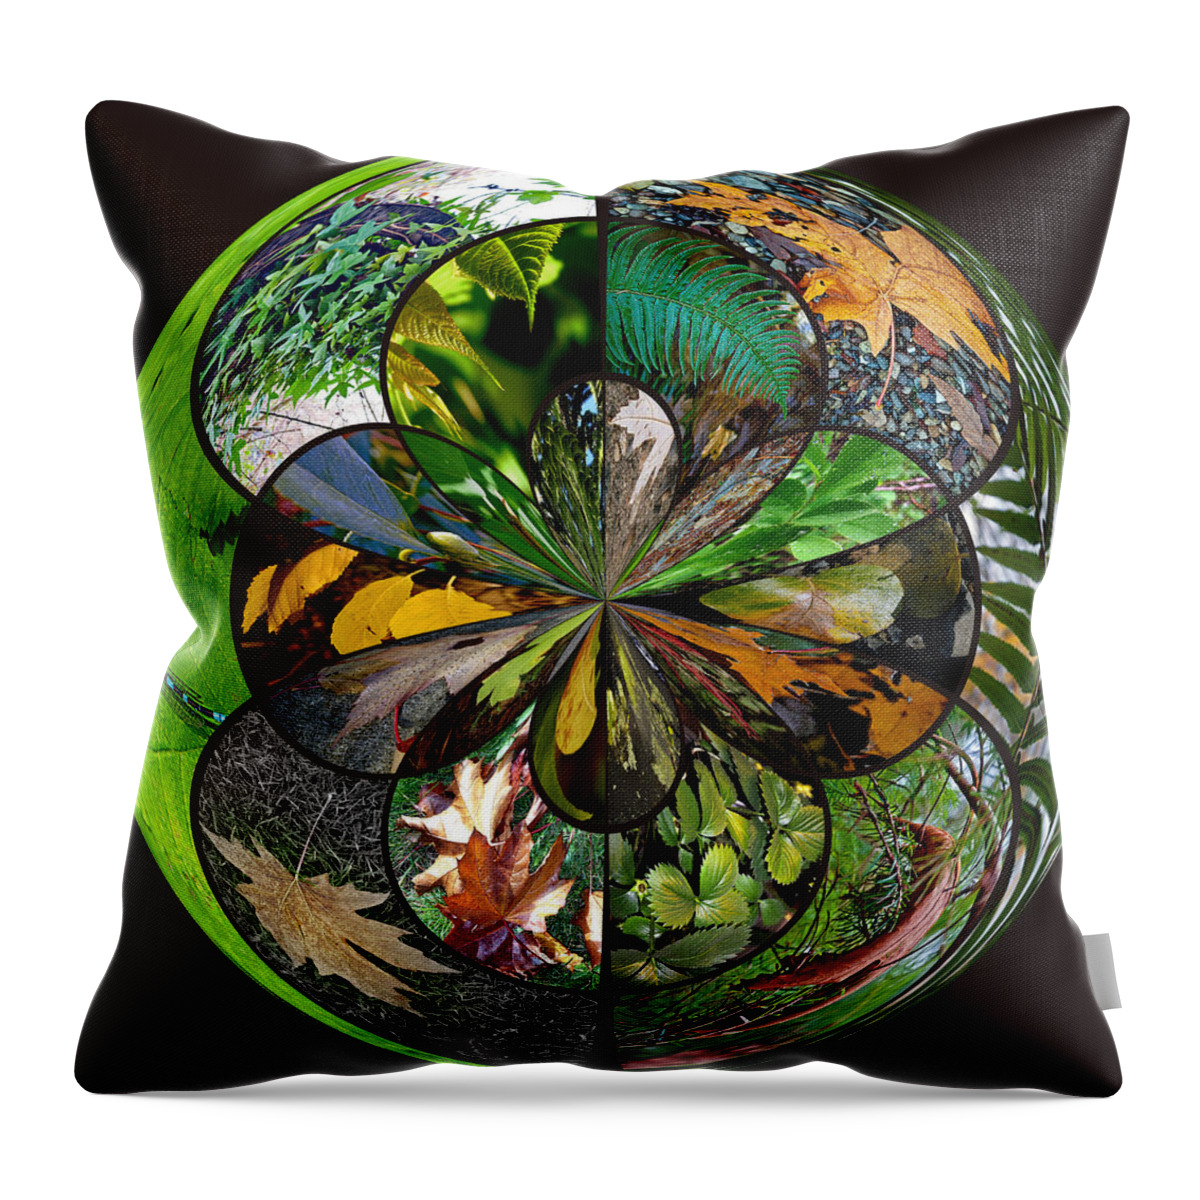 Variety Throw Pillow featuring the photograph Leaf Collage Orb by Tikvah's Hope